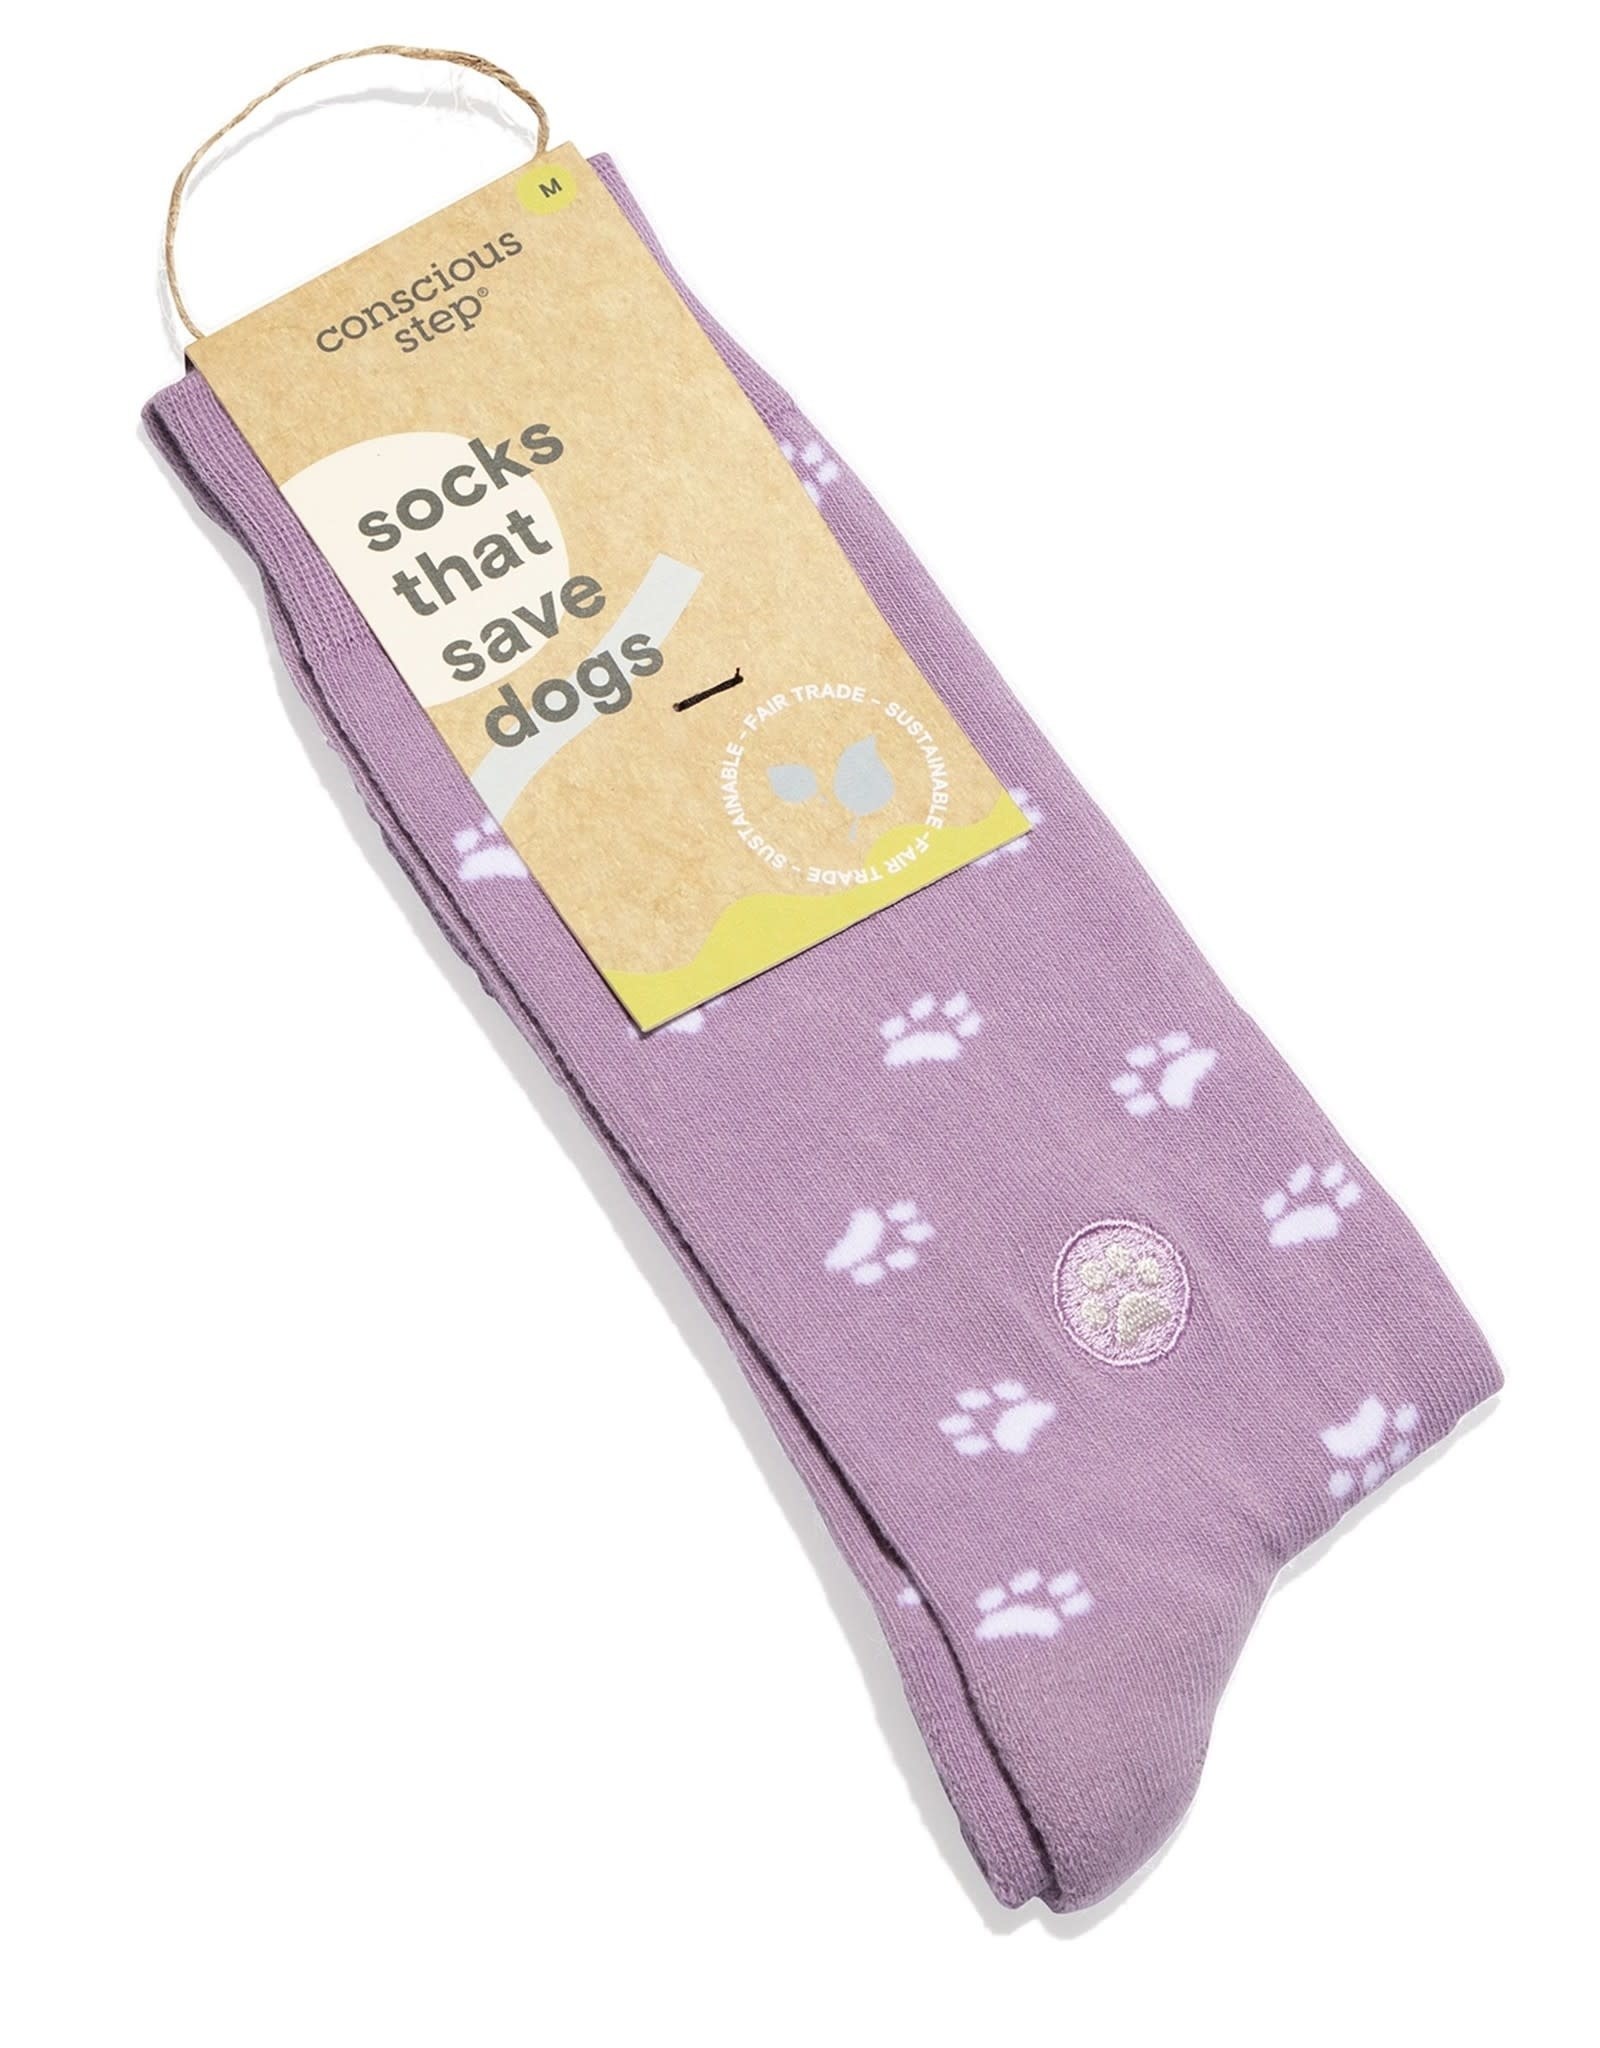 Conscious Step Socks that Save Dogs (Lavender)